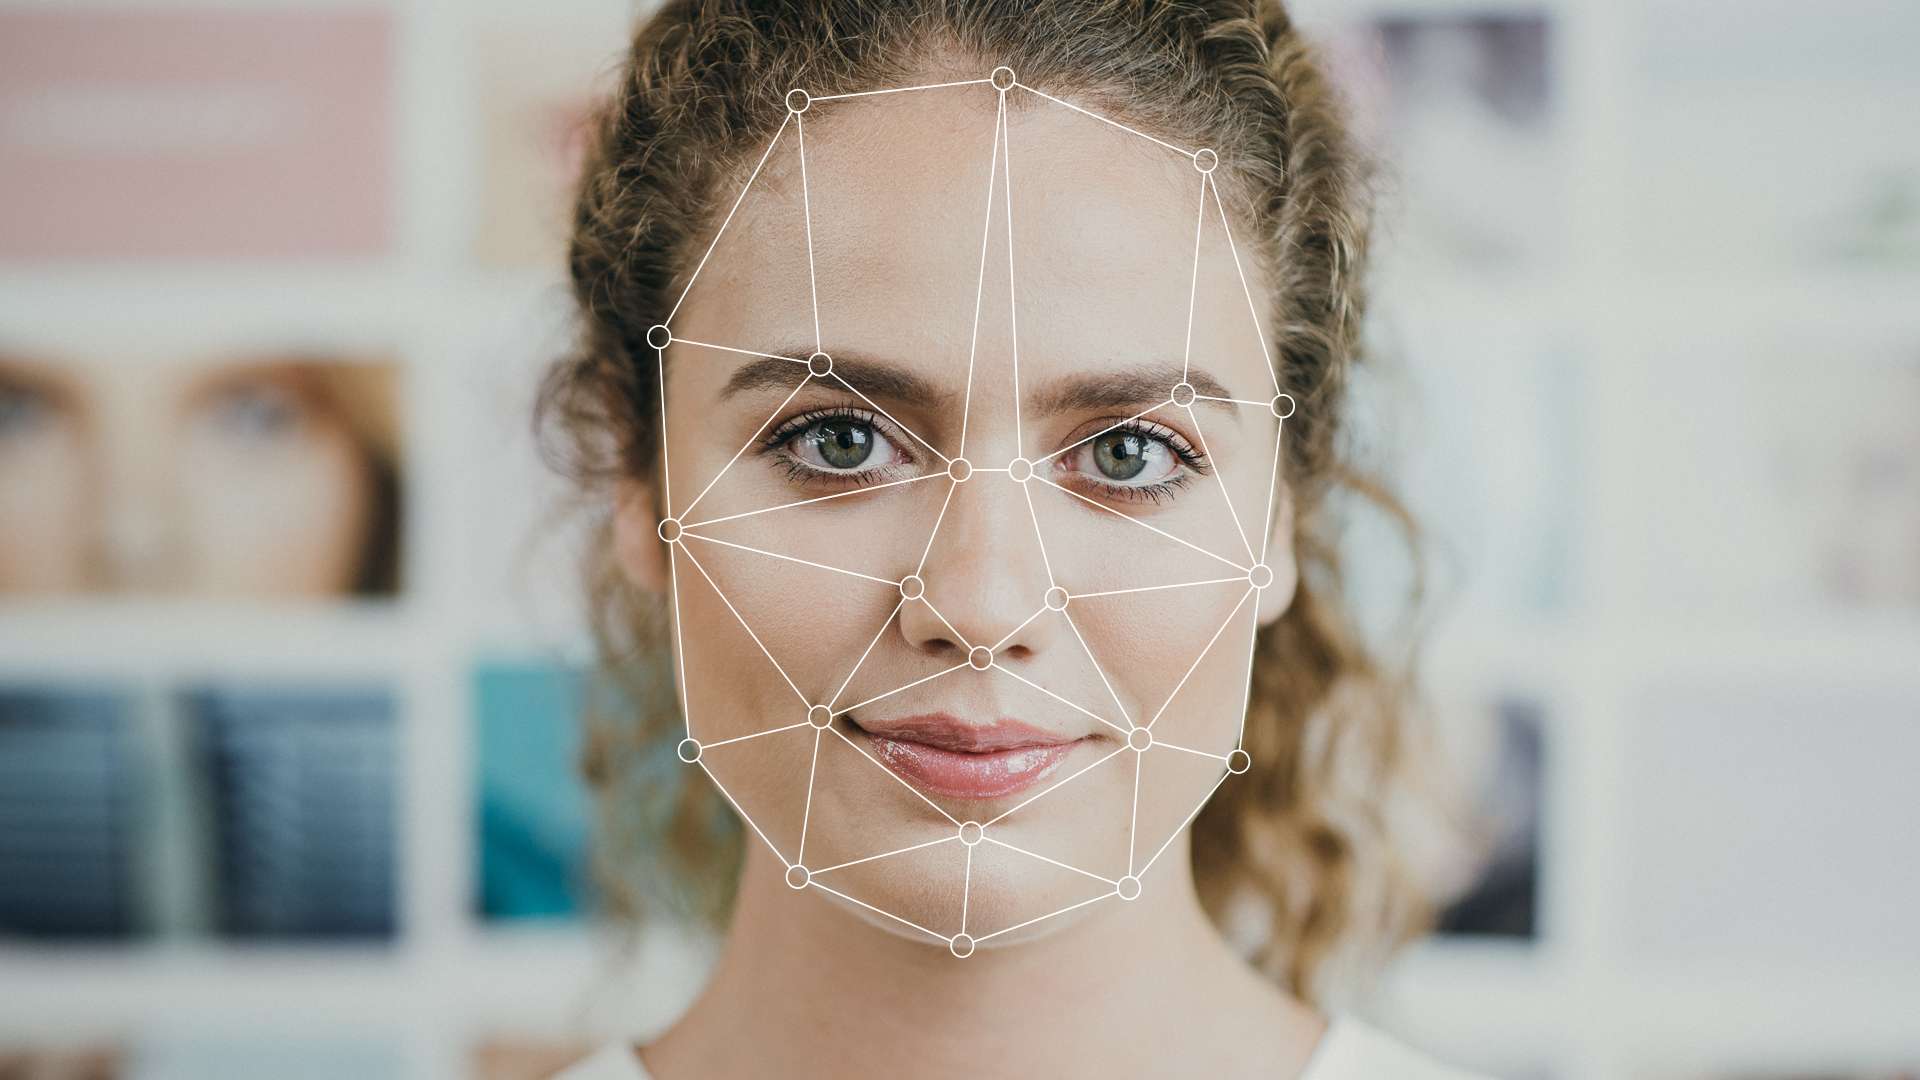 Using Facial Recognition To Personalize Ads